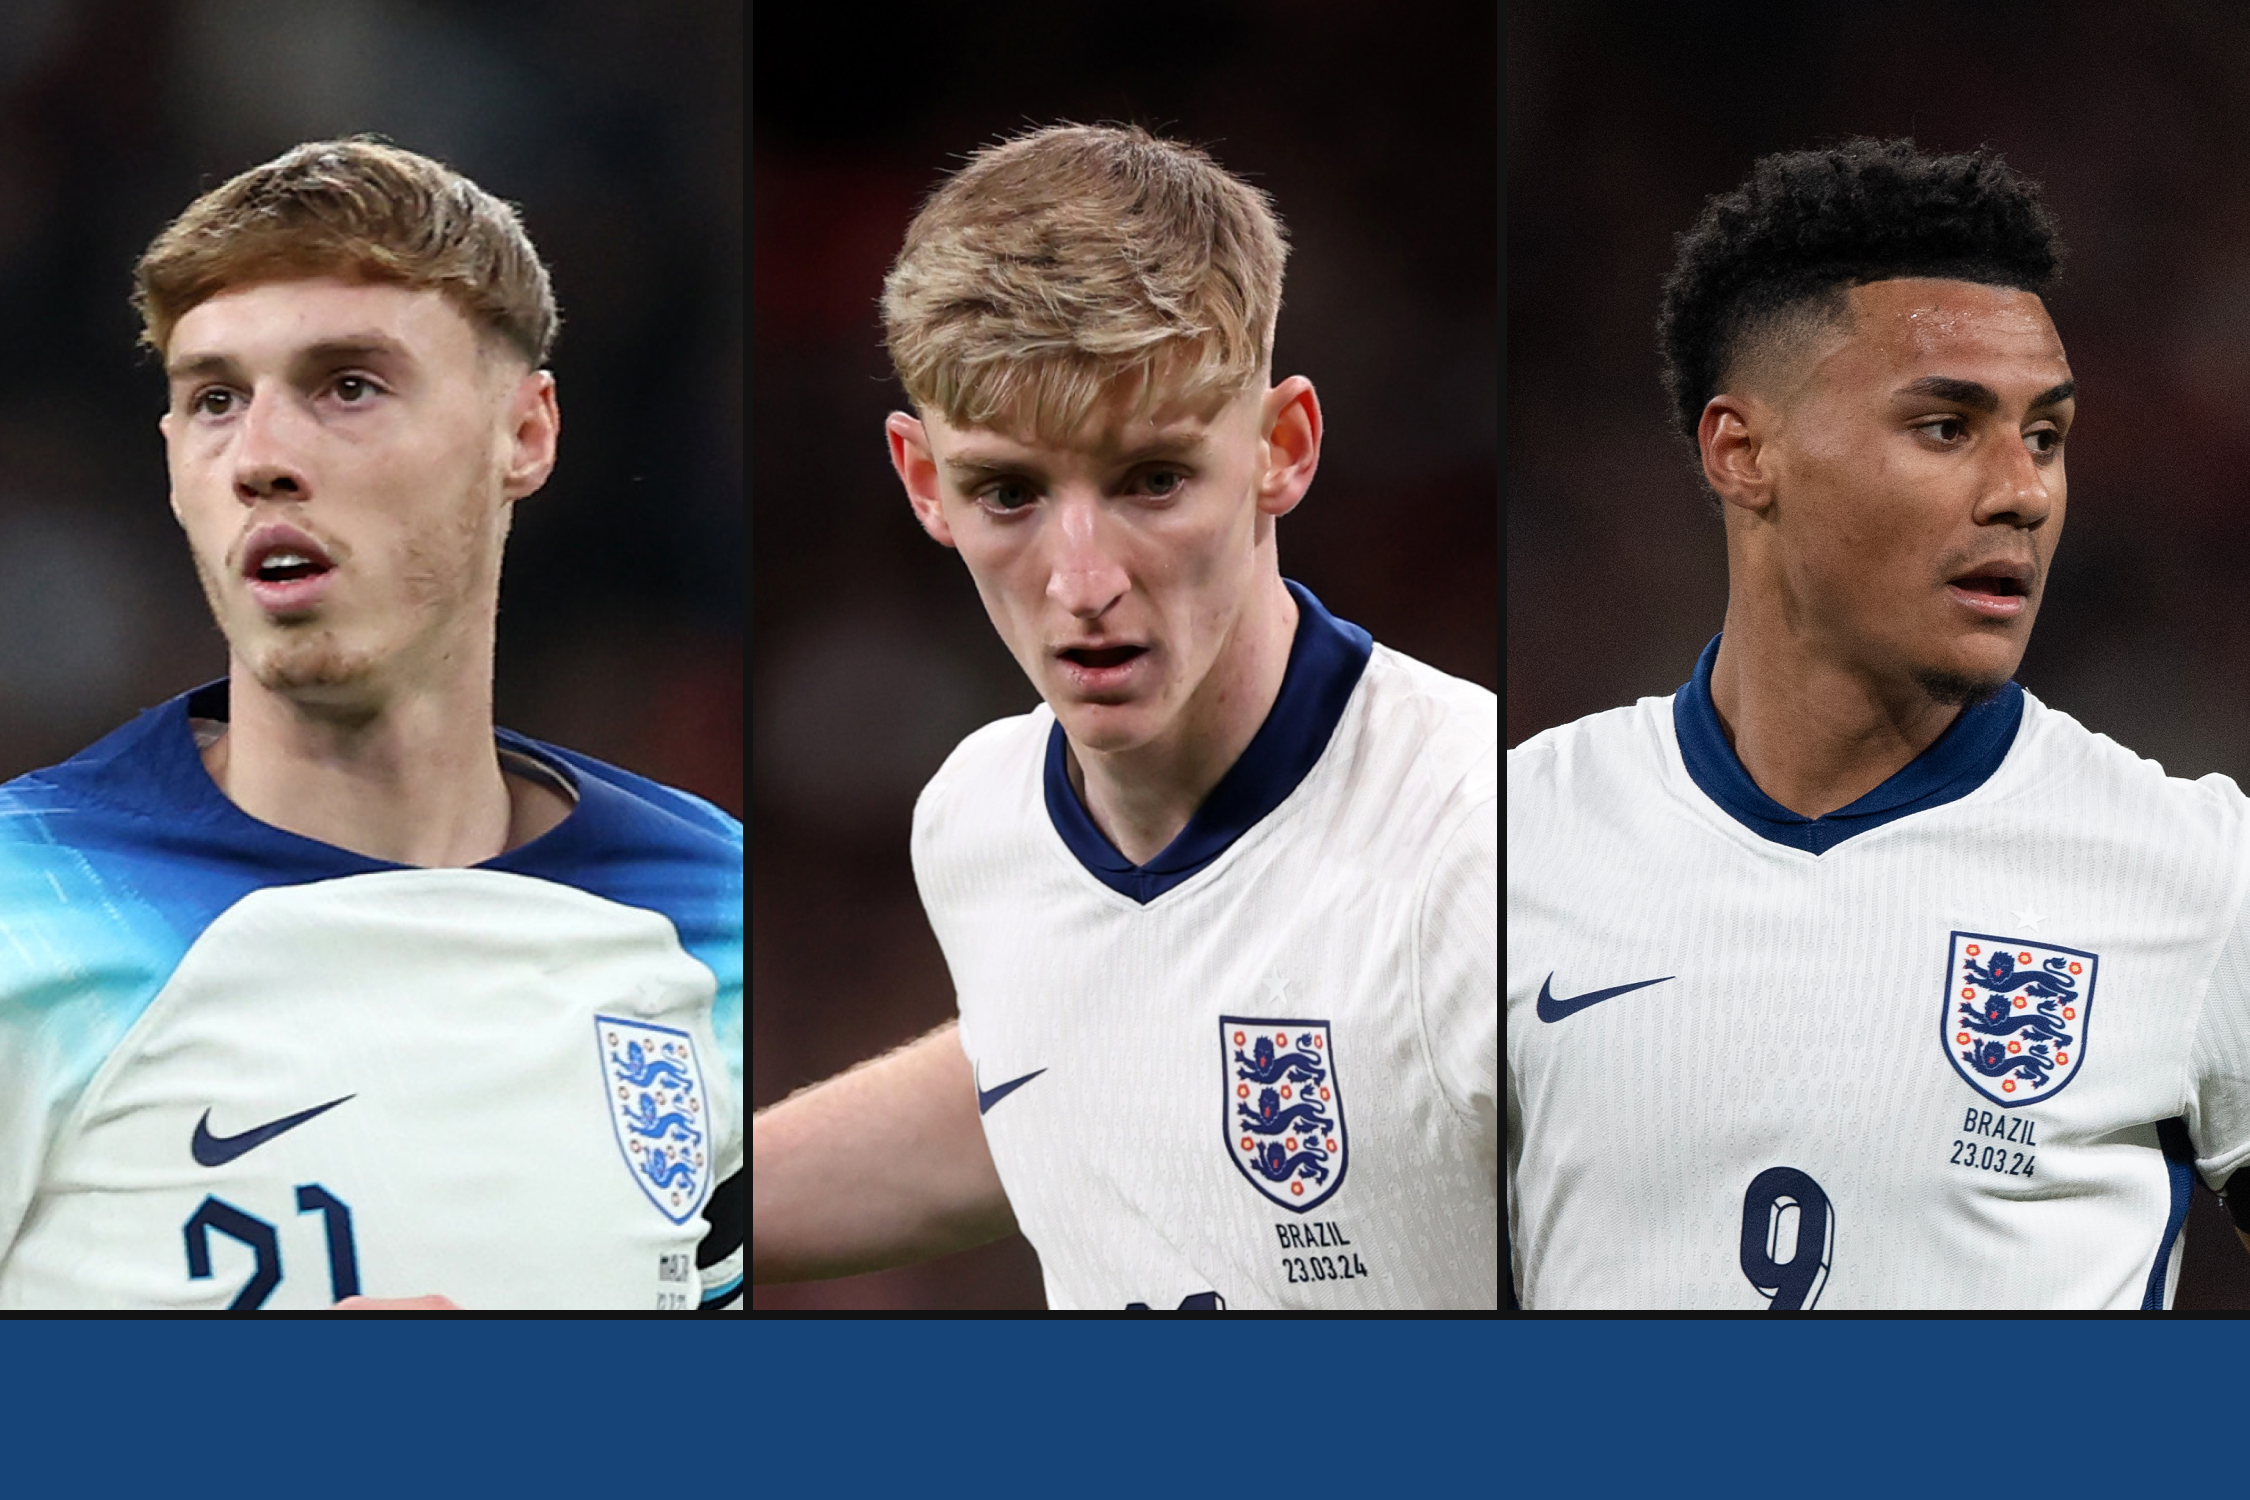 Picking an England squad for Euro 2024 based on FPL points